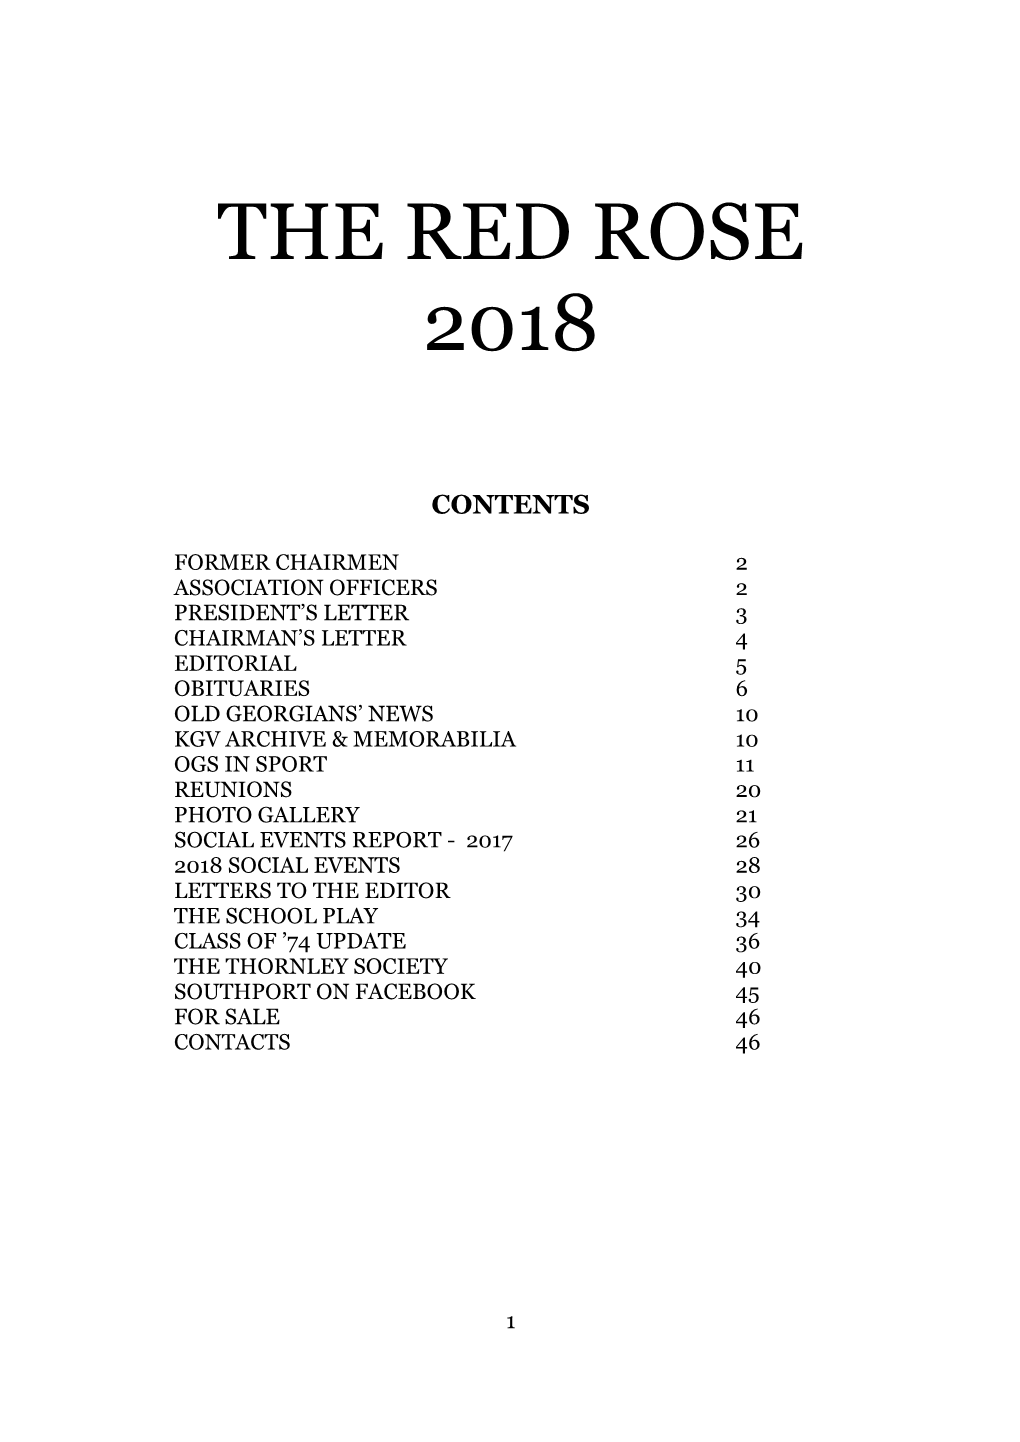 The Red Rose 2018